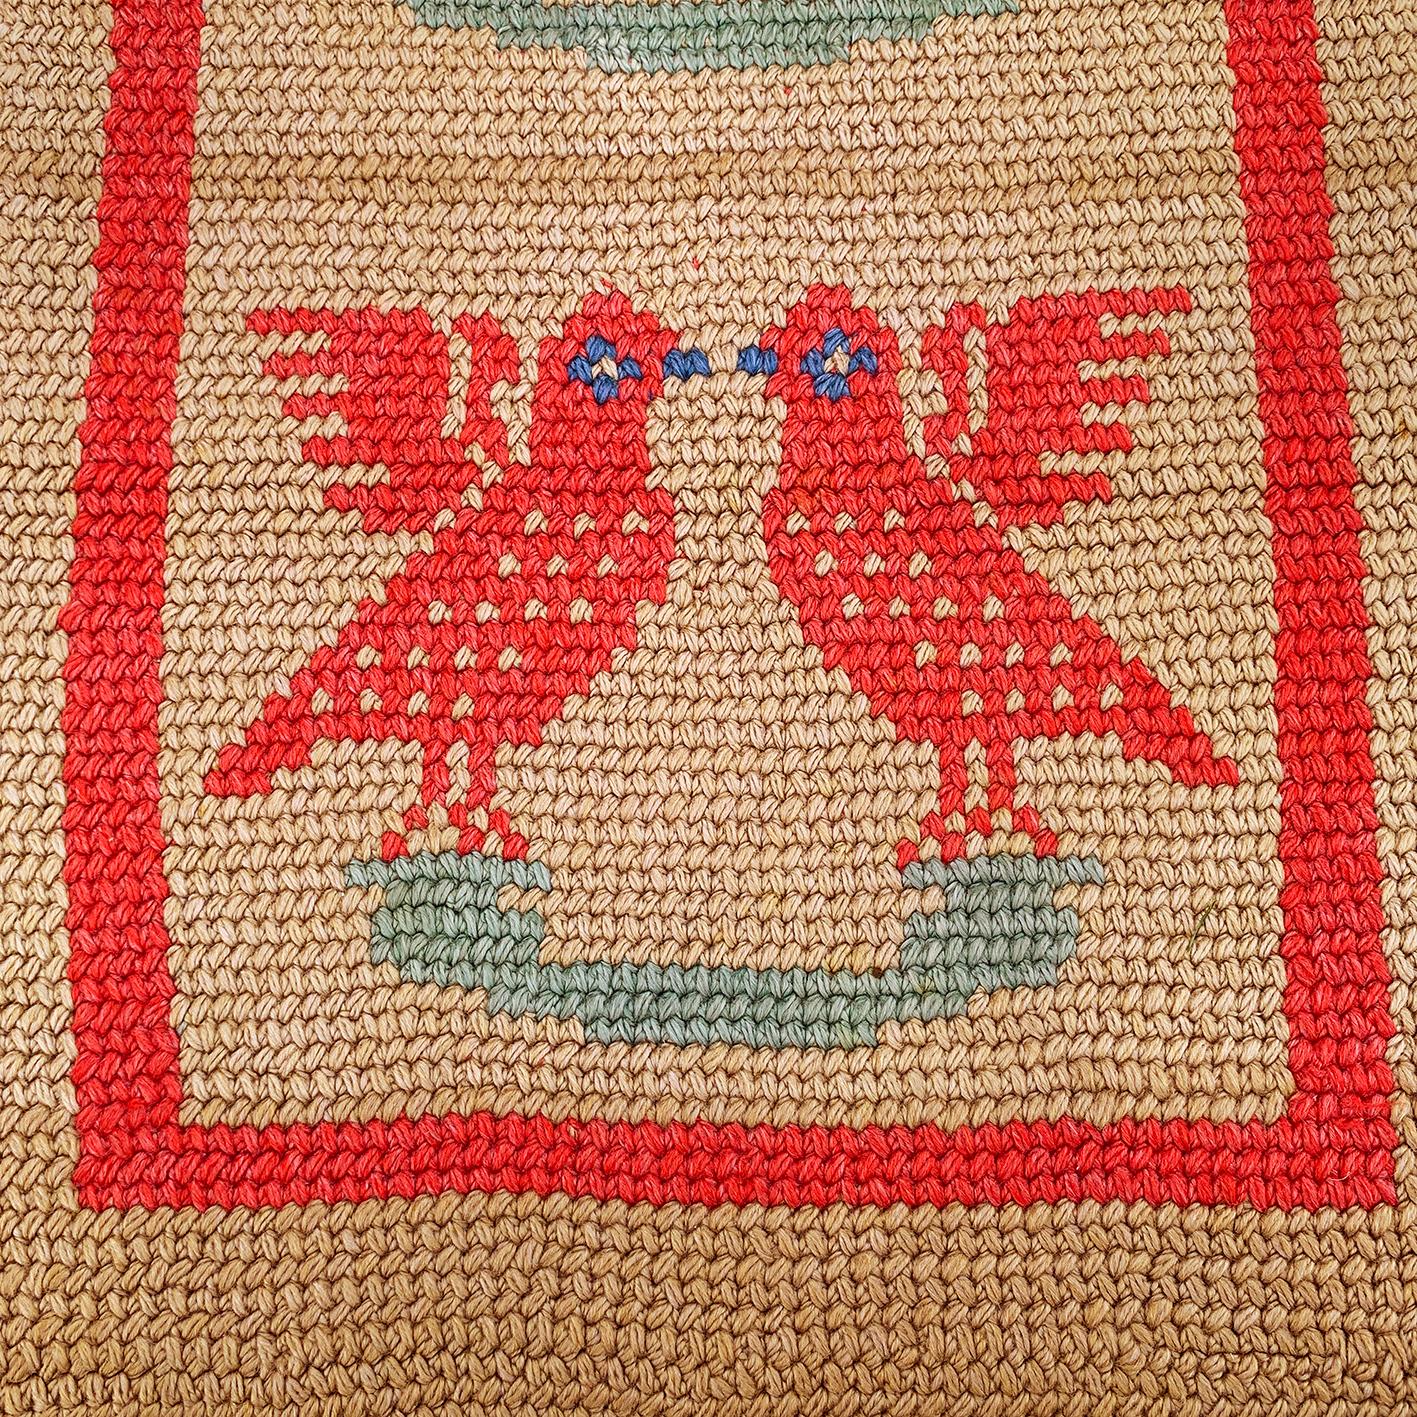 Hand-Crafted Crochet Birds Runner Small Rug 1920s Vintage Wool Christmas Wall Hanging Floor